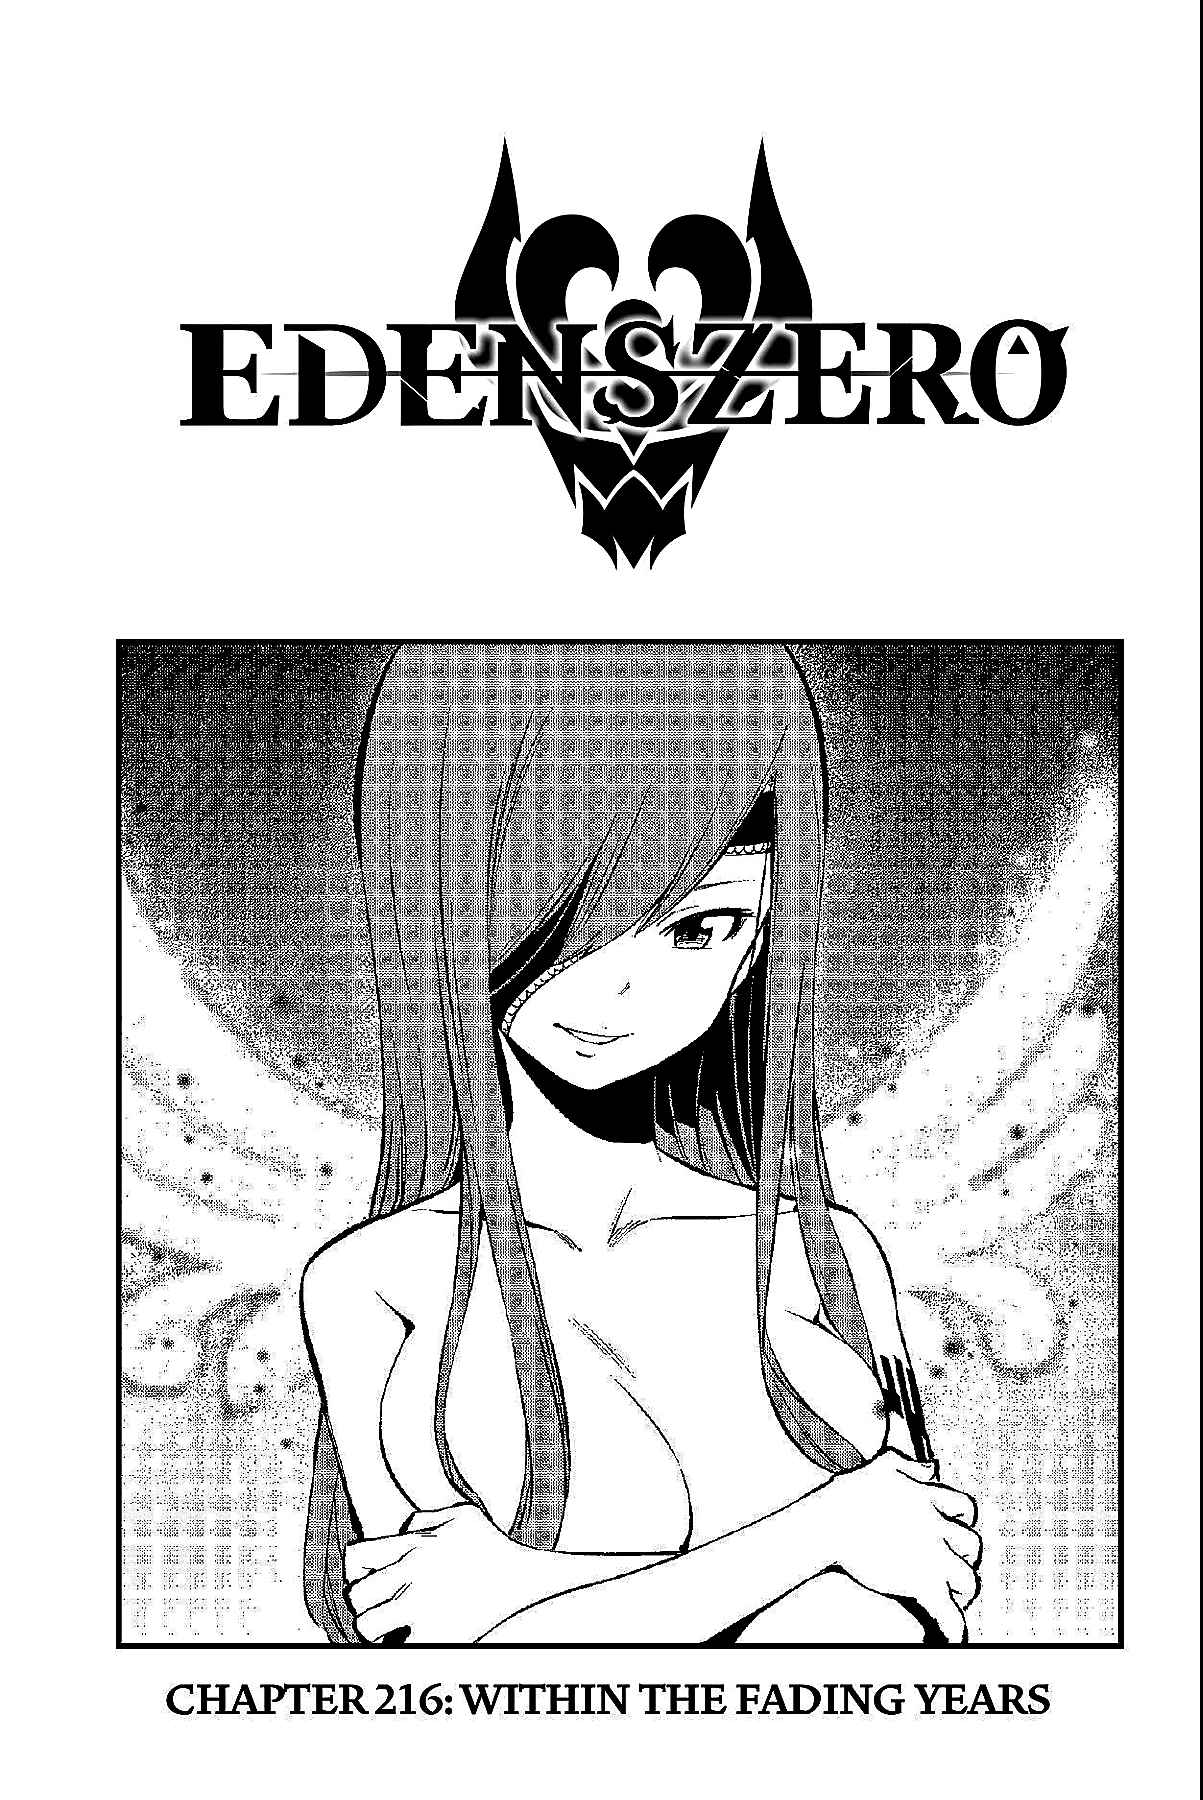 1001 Ways To Say This Arc Is Over. Edens Zero Chapter 216 BREAKDOWN